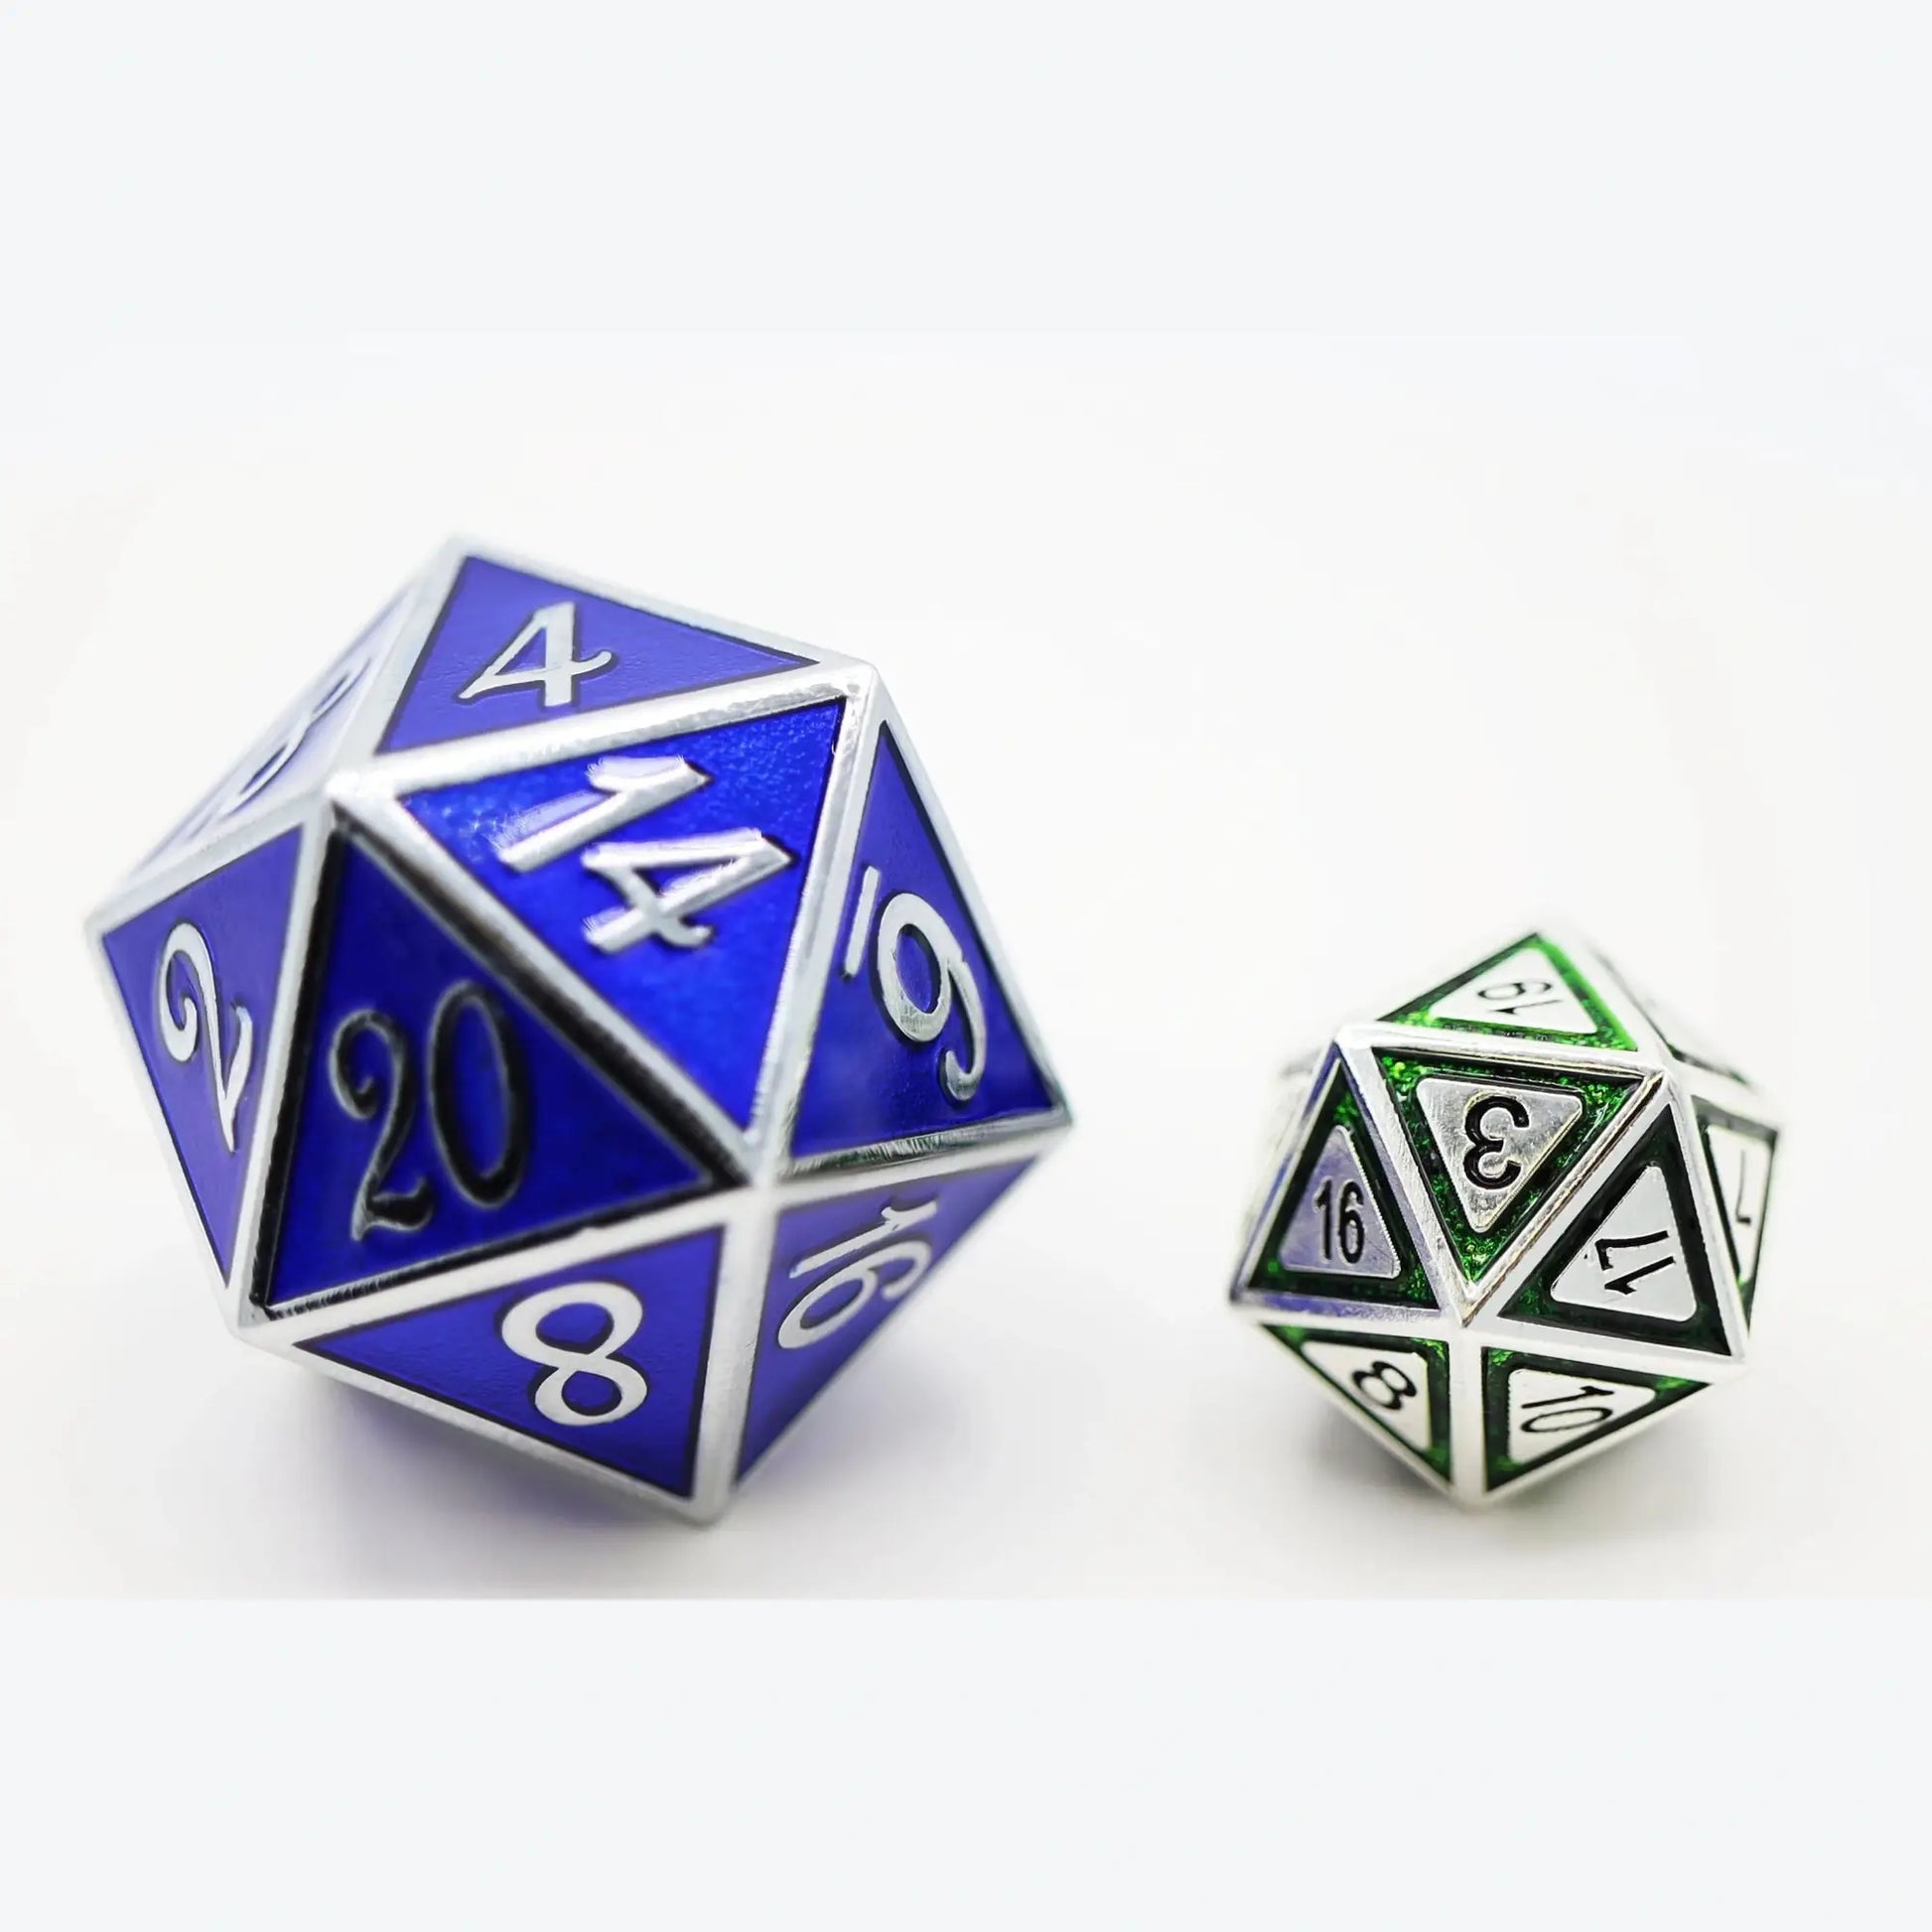 35mm Extra Large D20